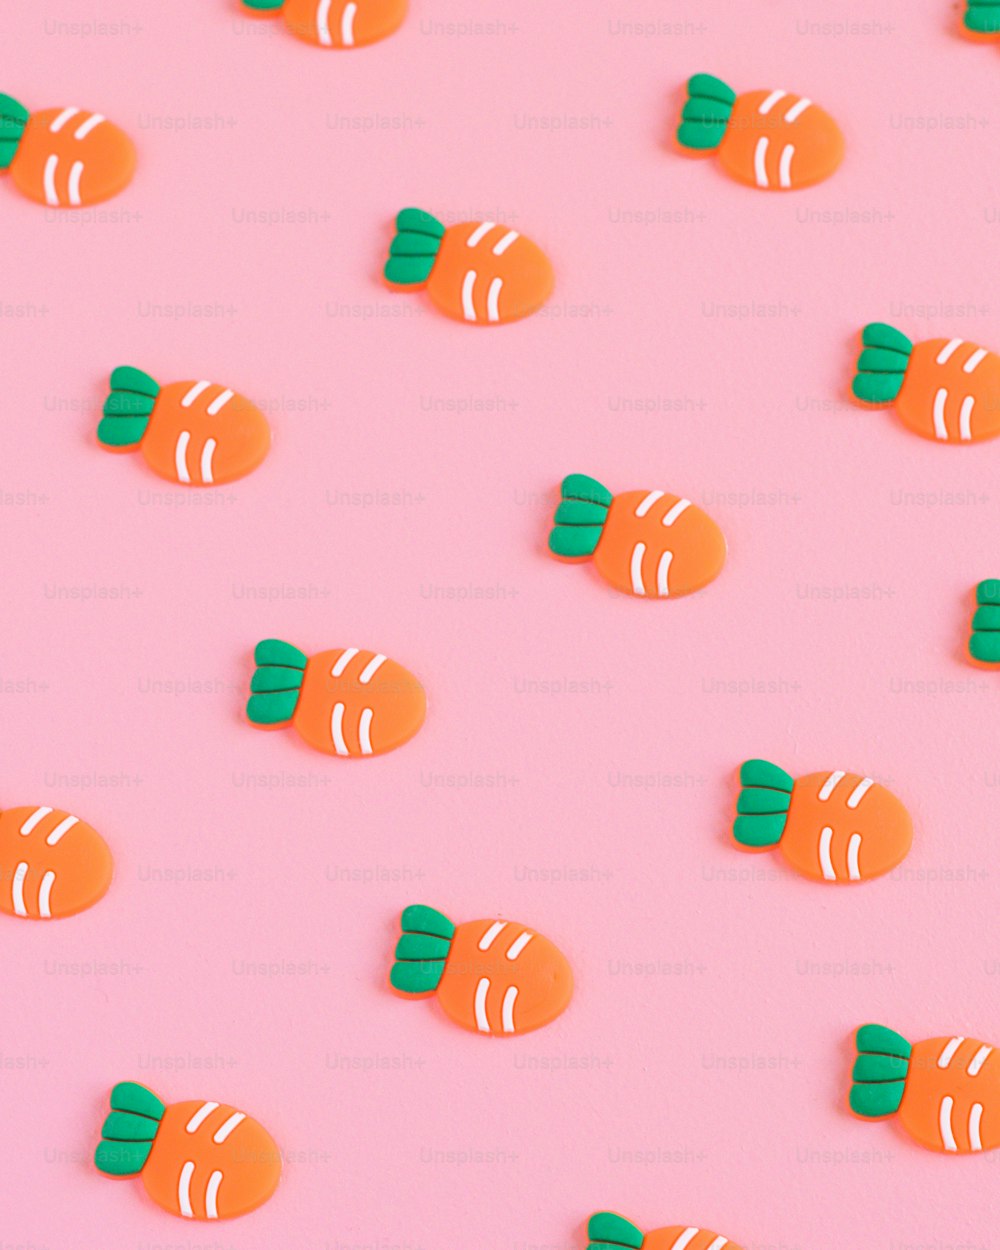 a group of orange and green candy candies on a pink background